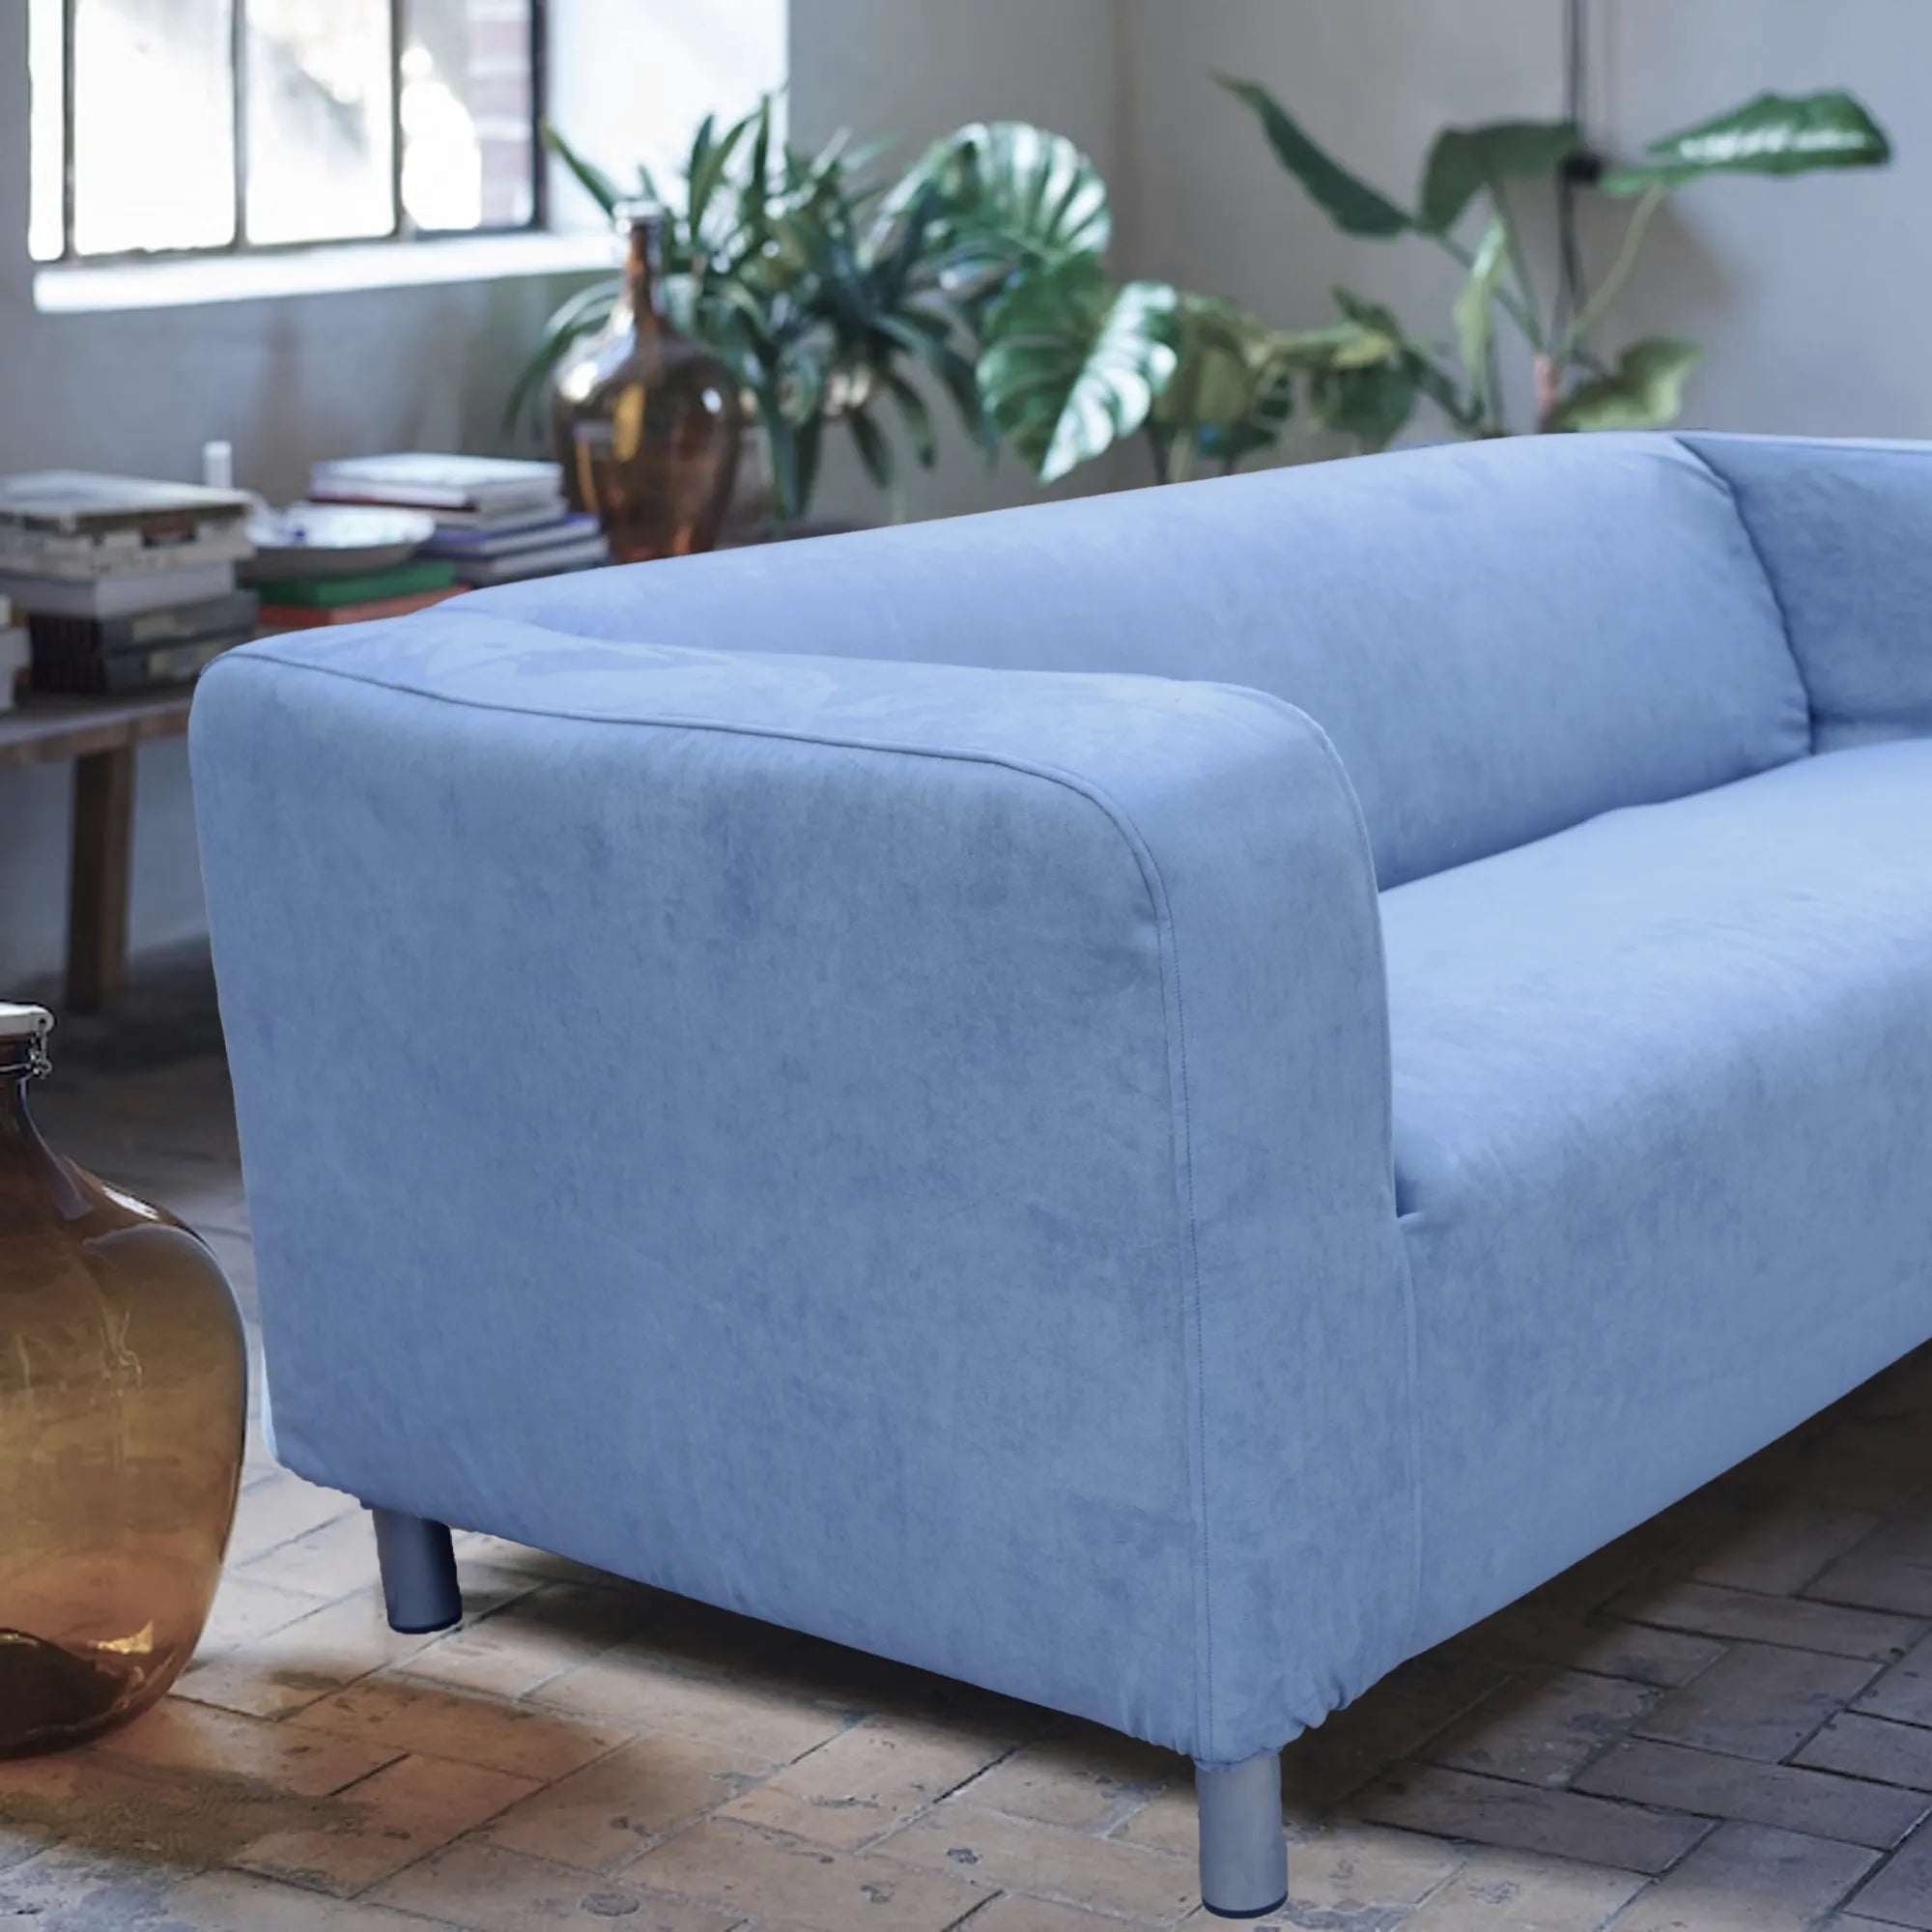 Ikea-Klippan-2-Seater-seat-Replacement-Sofa-cover-suede-blue-made-to-measure-custom-made-loveseat-breathable-fabric